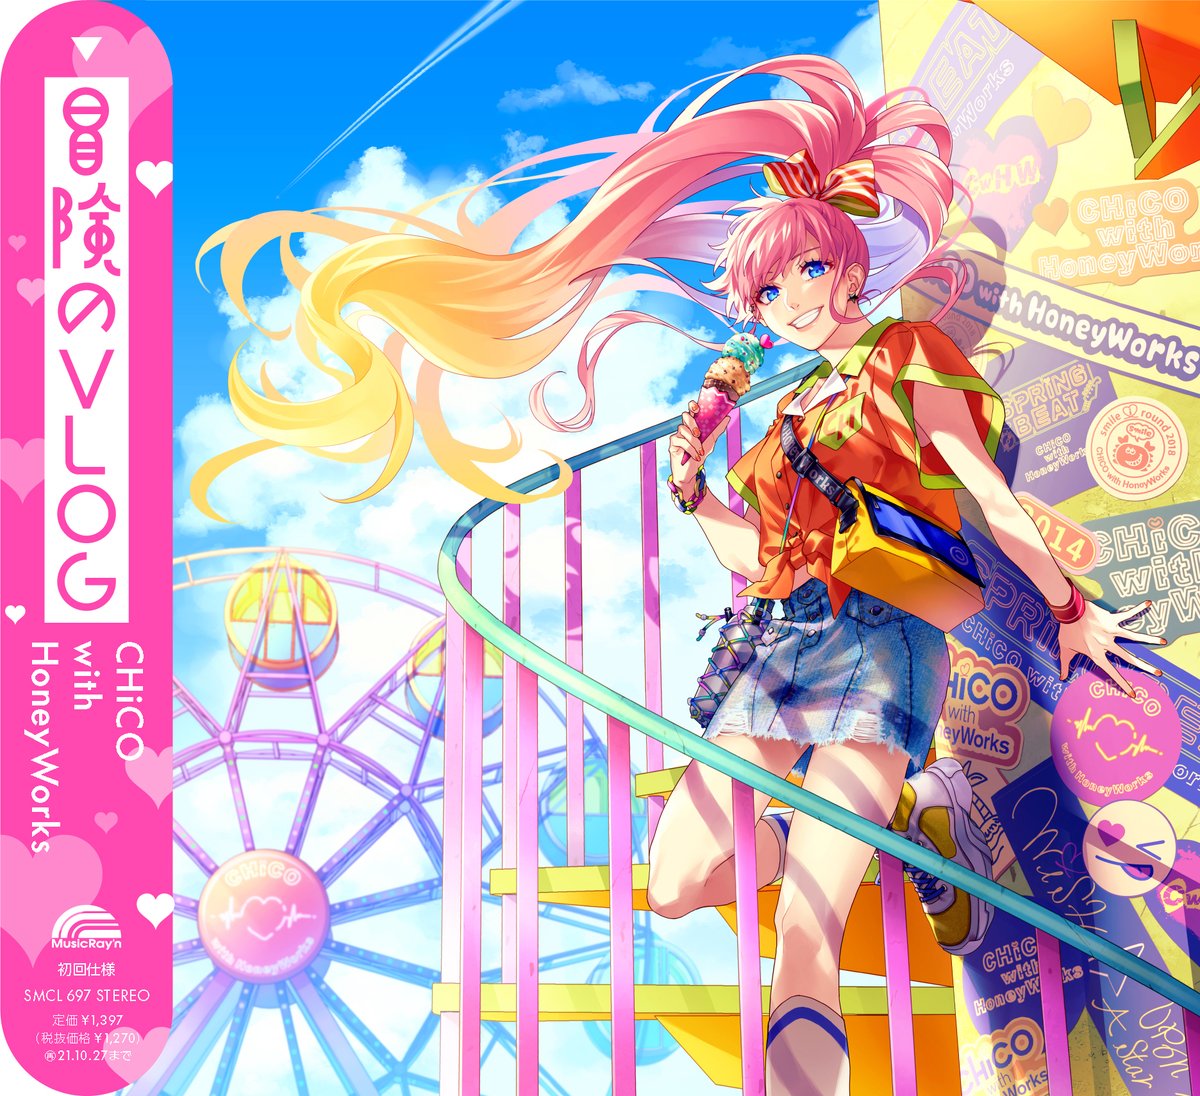 Cover art for『CHiCO with HoneyWorks - Super Idol』from the release『Bouken no VLOG』